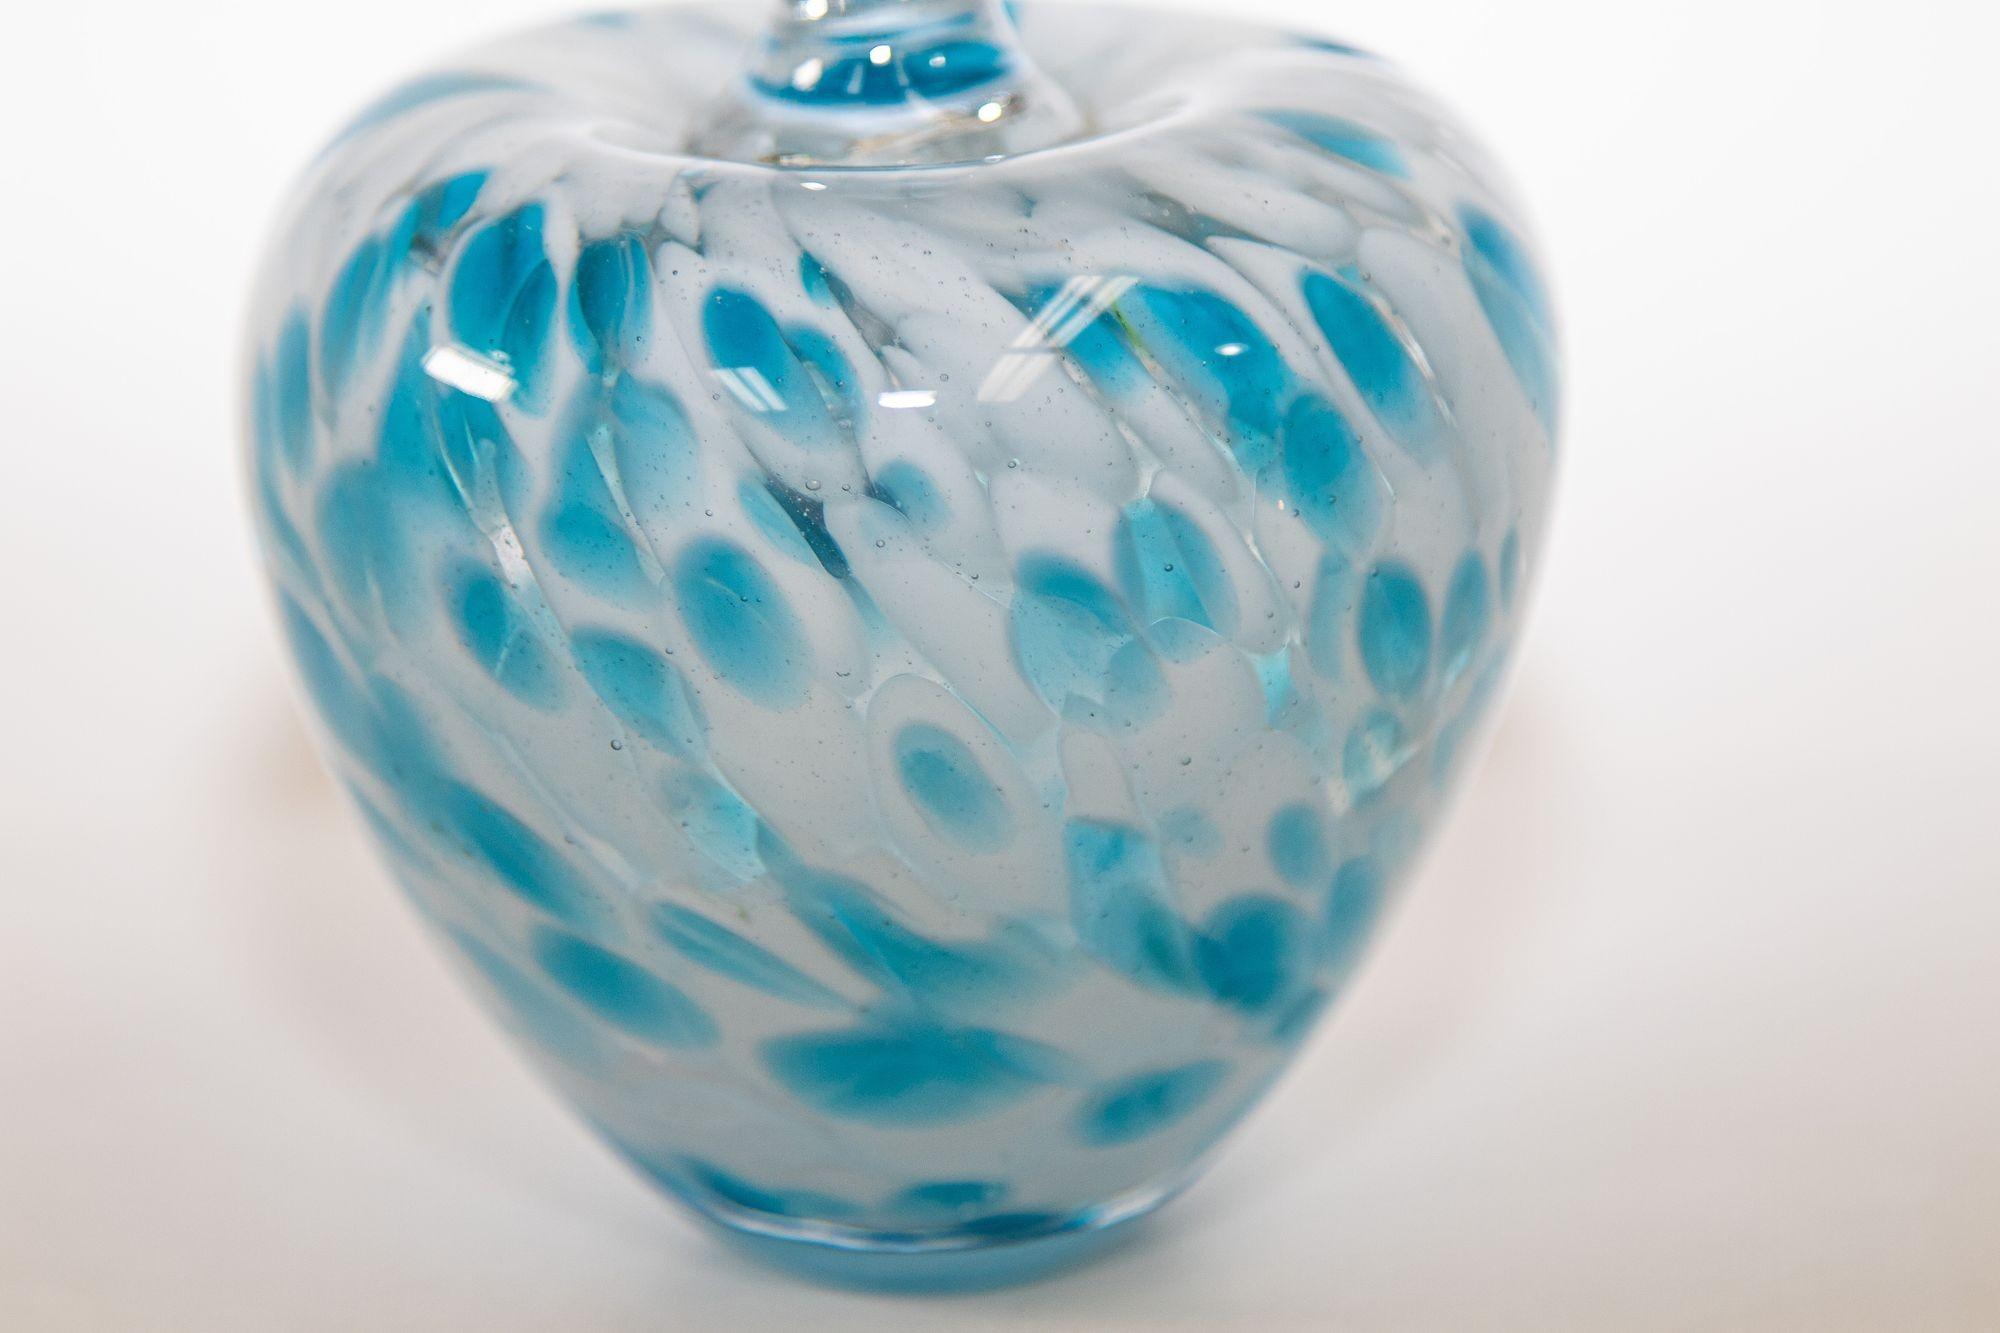 20th Century Mid-Century Modern Murano Art Glass Blue and Clear Apple Sculpture Paperweight For Sale